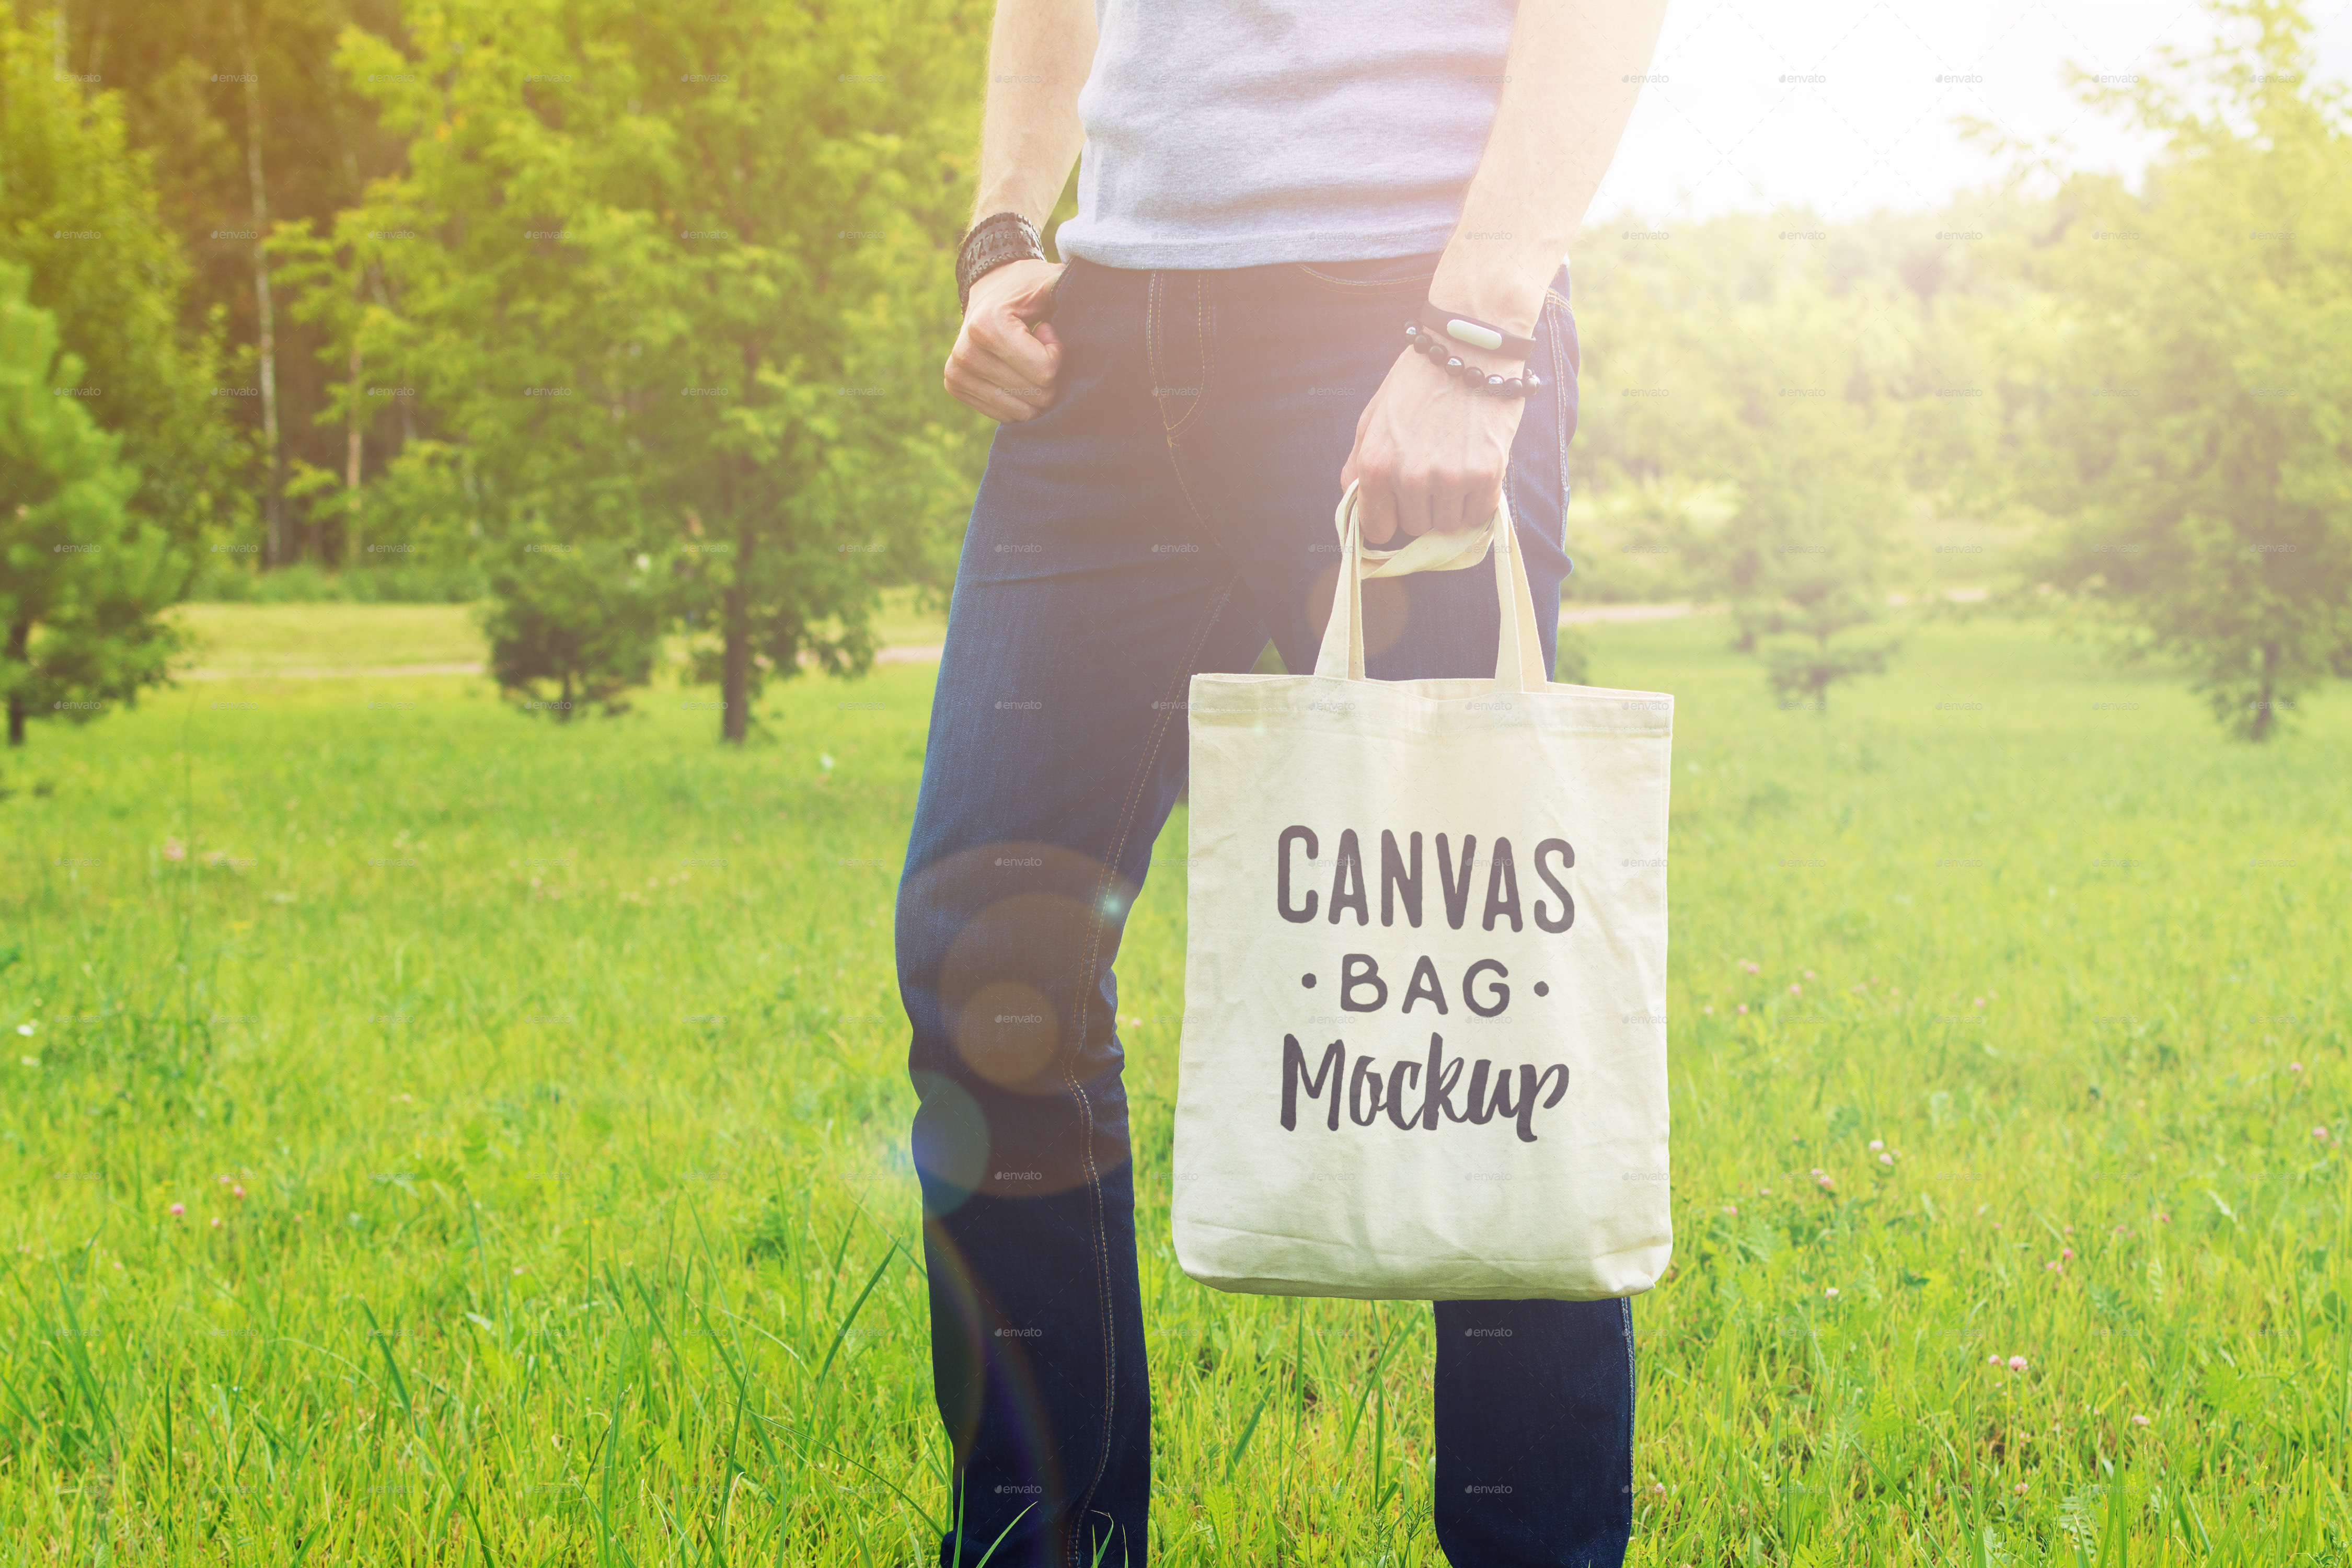 Download Canvas Bag Mockup by bulbfish | GraphicRiver